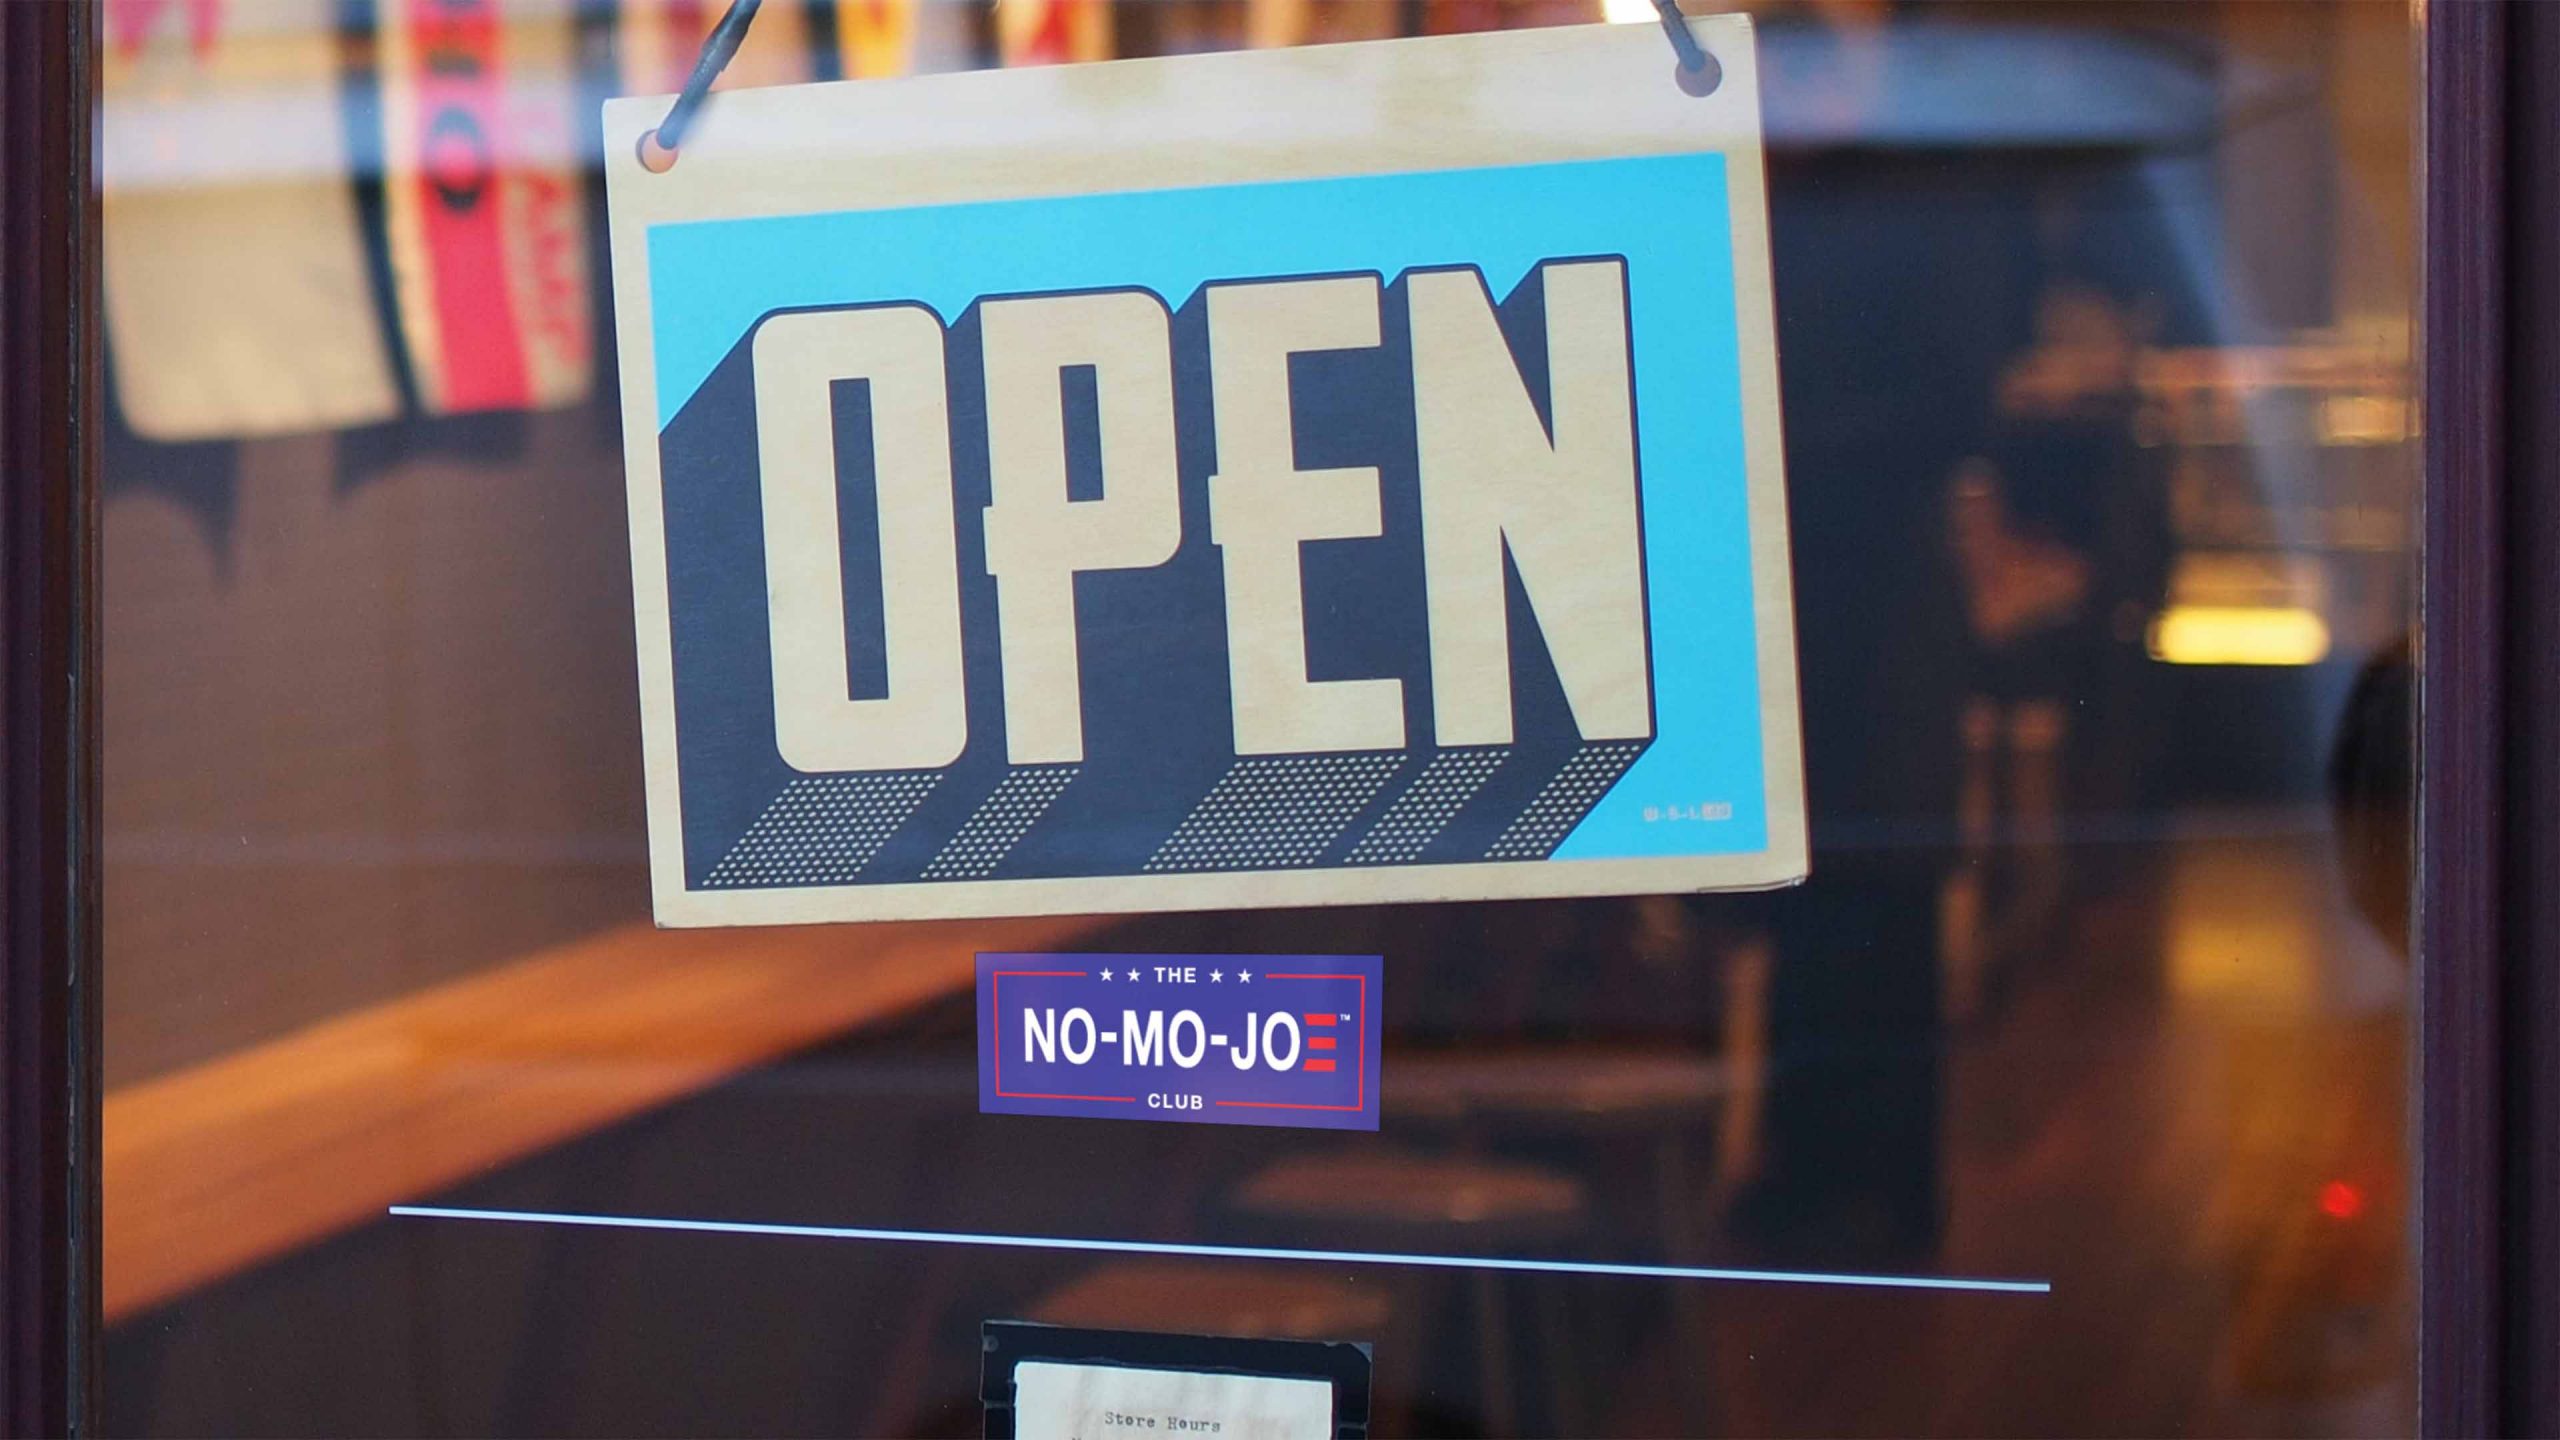 The No-Mo-Joe Club™ window cling on the glass front door of an business displaying an open sign